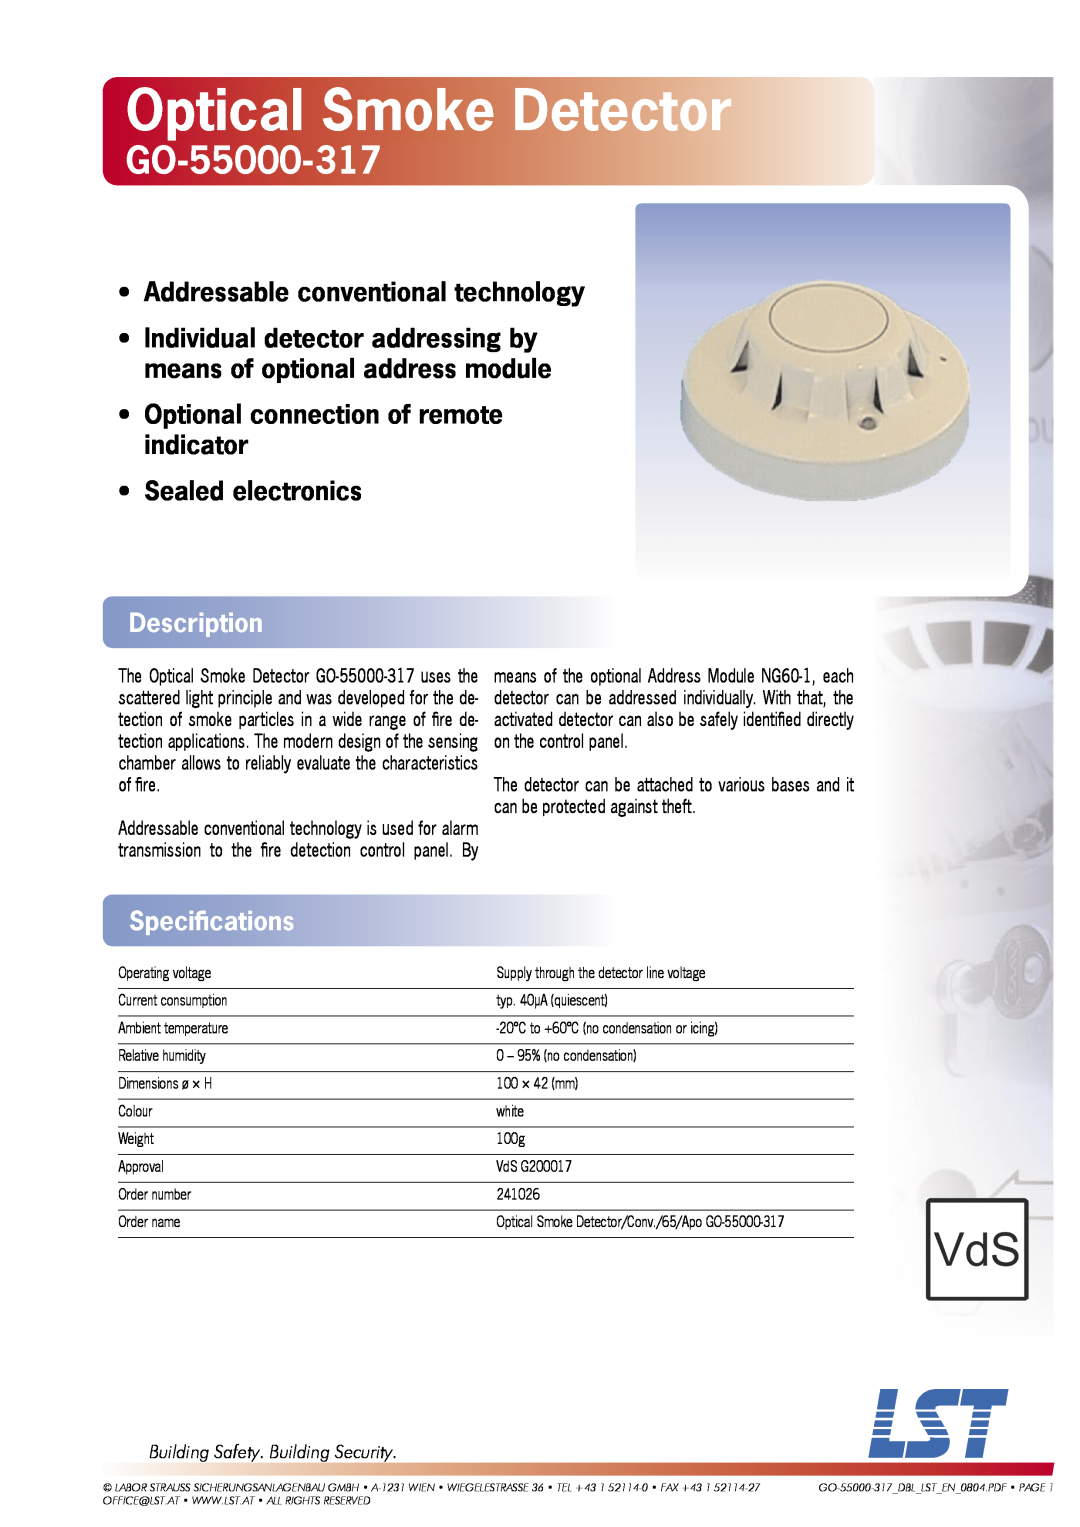 LST GO-55000-317 specifications Optical Smoke Detector, Addressable conventional technology, Sealed electronics 